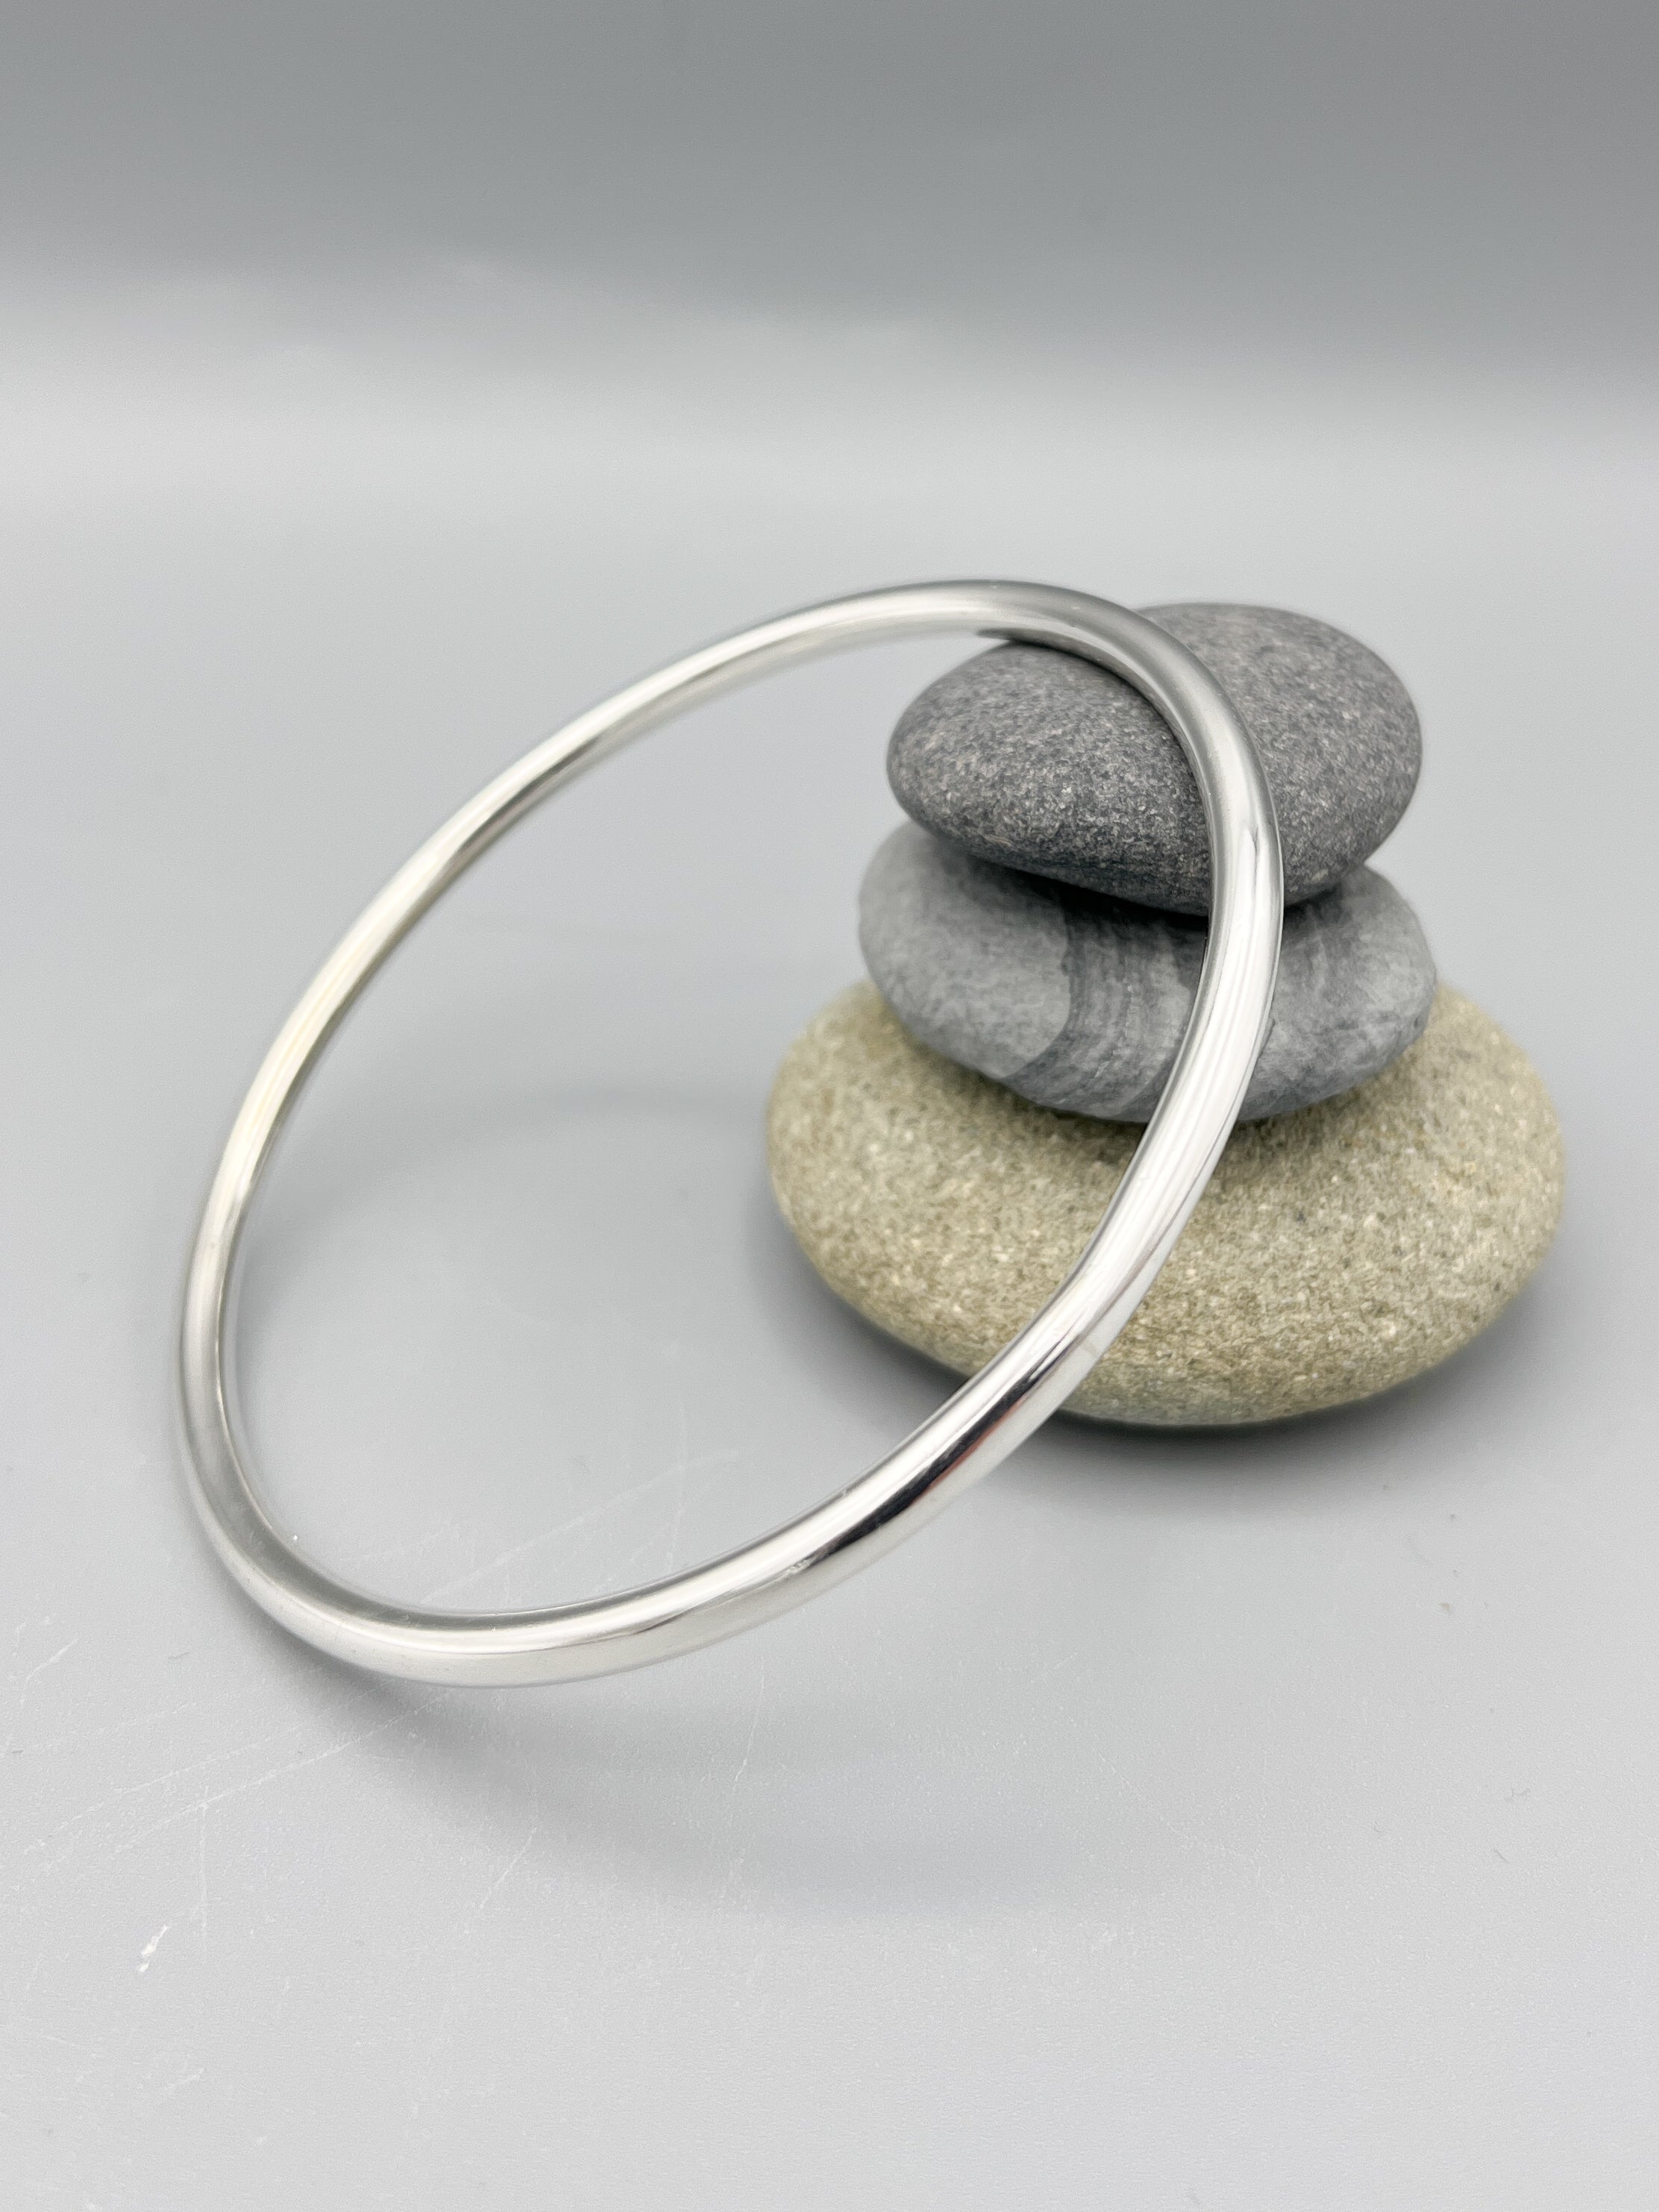 Sterling Silver Bangle, round design with a polished finish